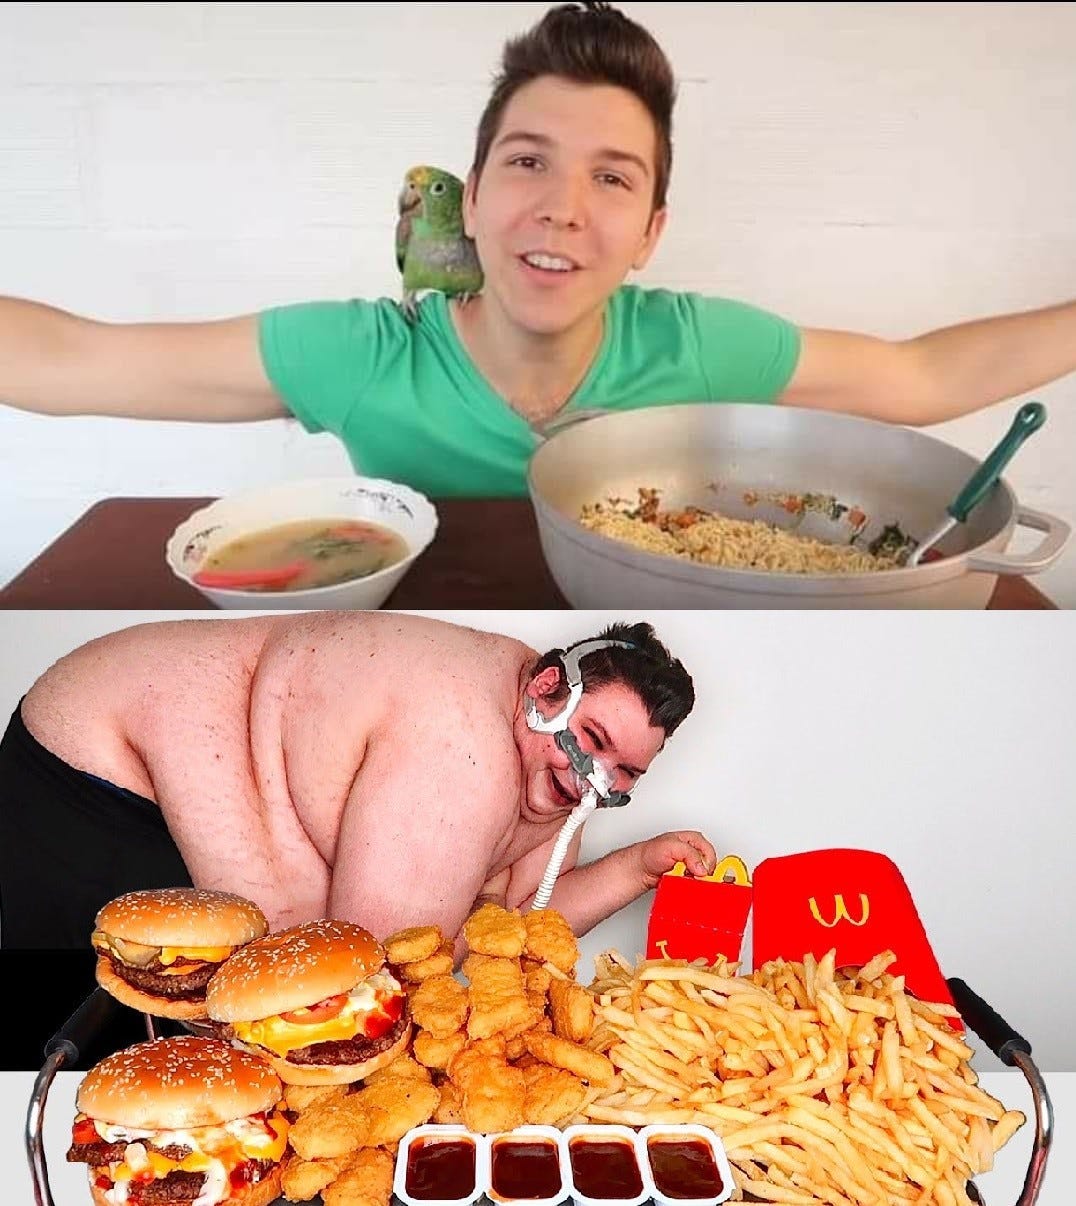 two photos six years apart one of a young healthy man and the other of a large man eating food